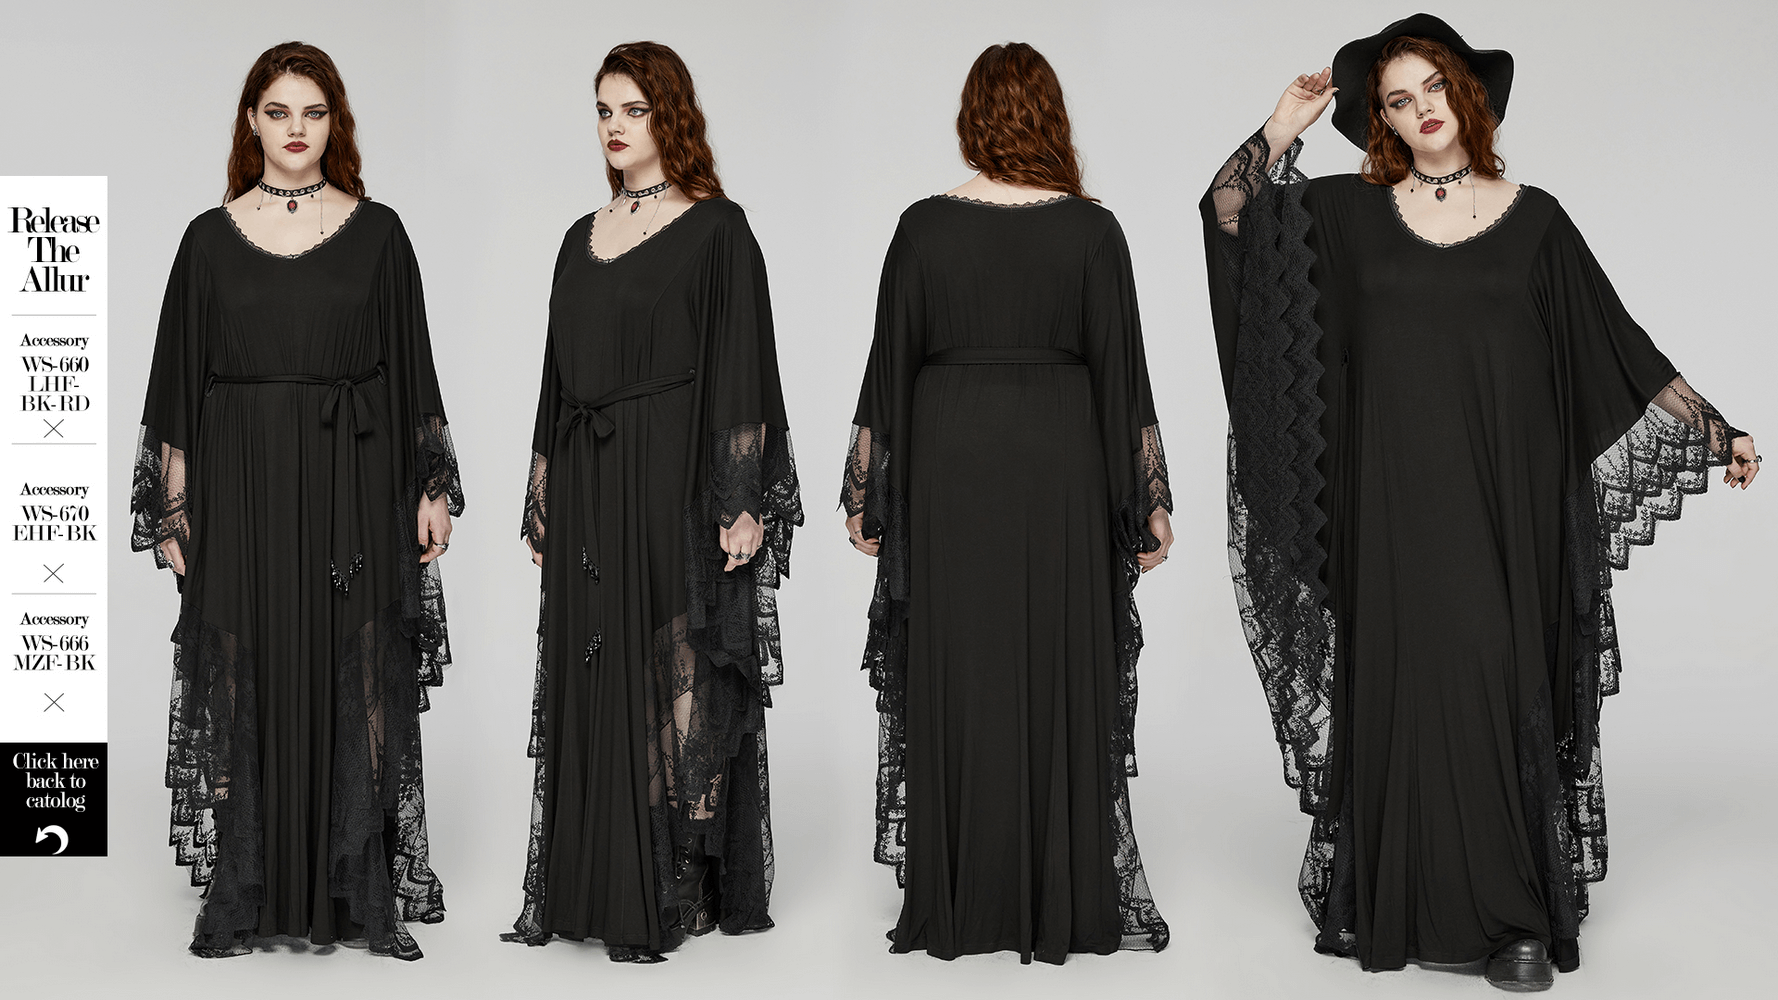 Gothic Style Women's Lace-Spliced Flowing Maxi Dress